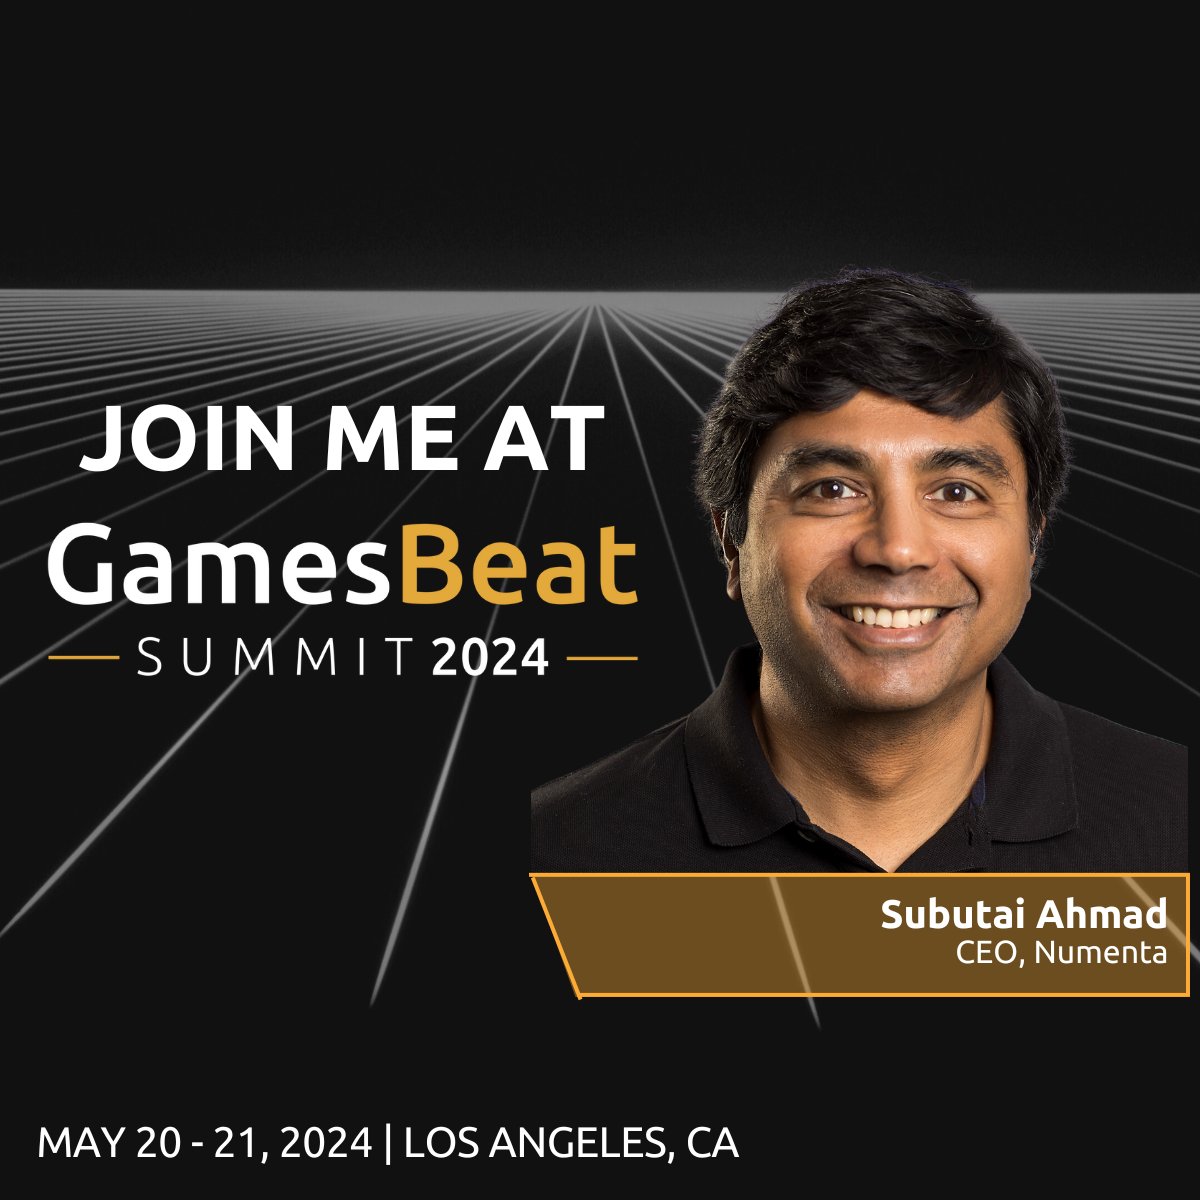 Catch us at the @GamesBeat Summit next week!

Our CEO @SubutaiAhmad and @GalliumStudios_ ' Founder Will Wright will be speaking in a panel on May 20. They will talk about the potential of brain-based AI agents and their impact on interactive environments.

numenta.com/company/events…